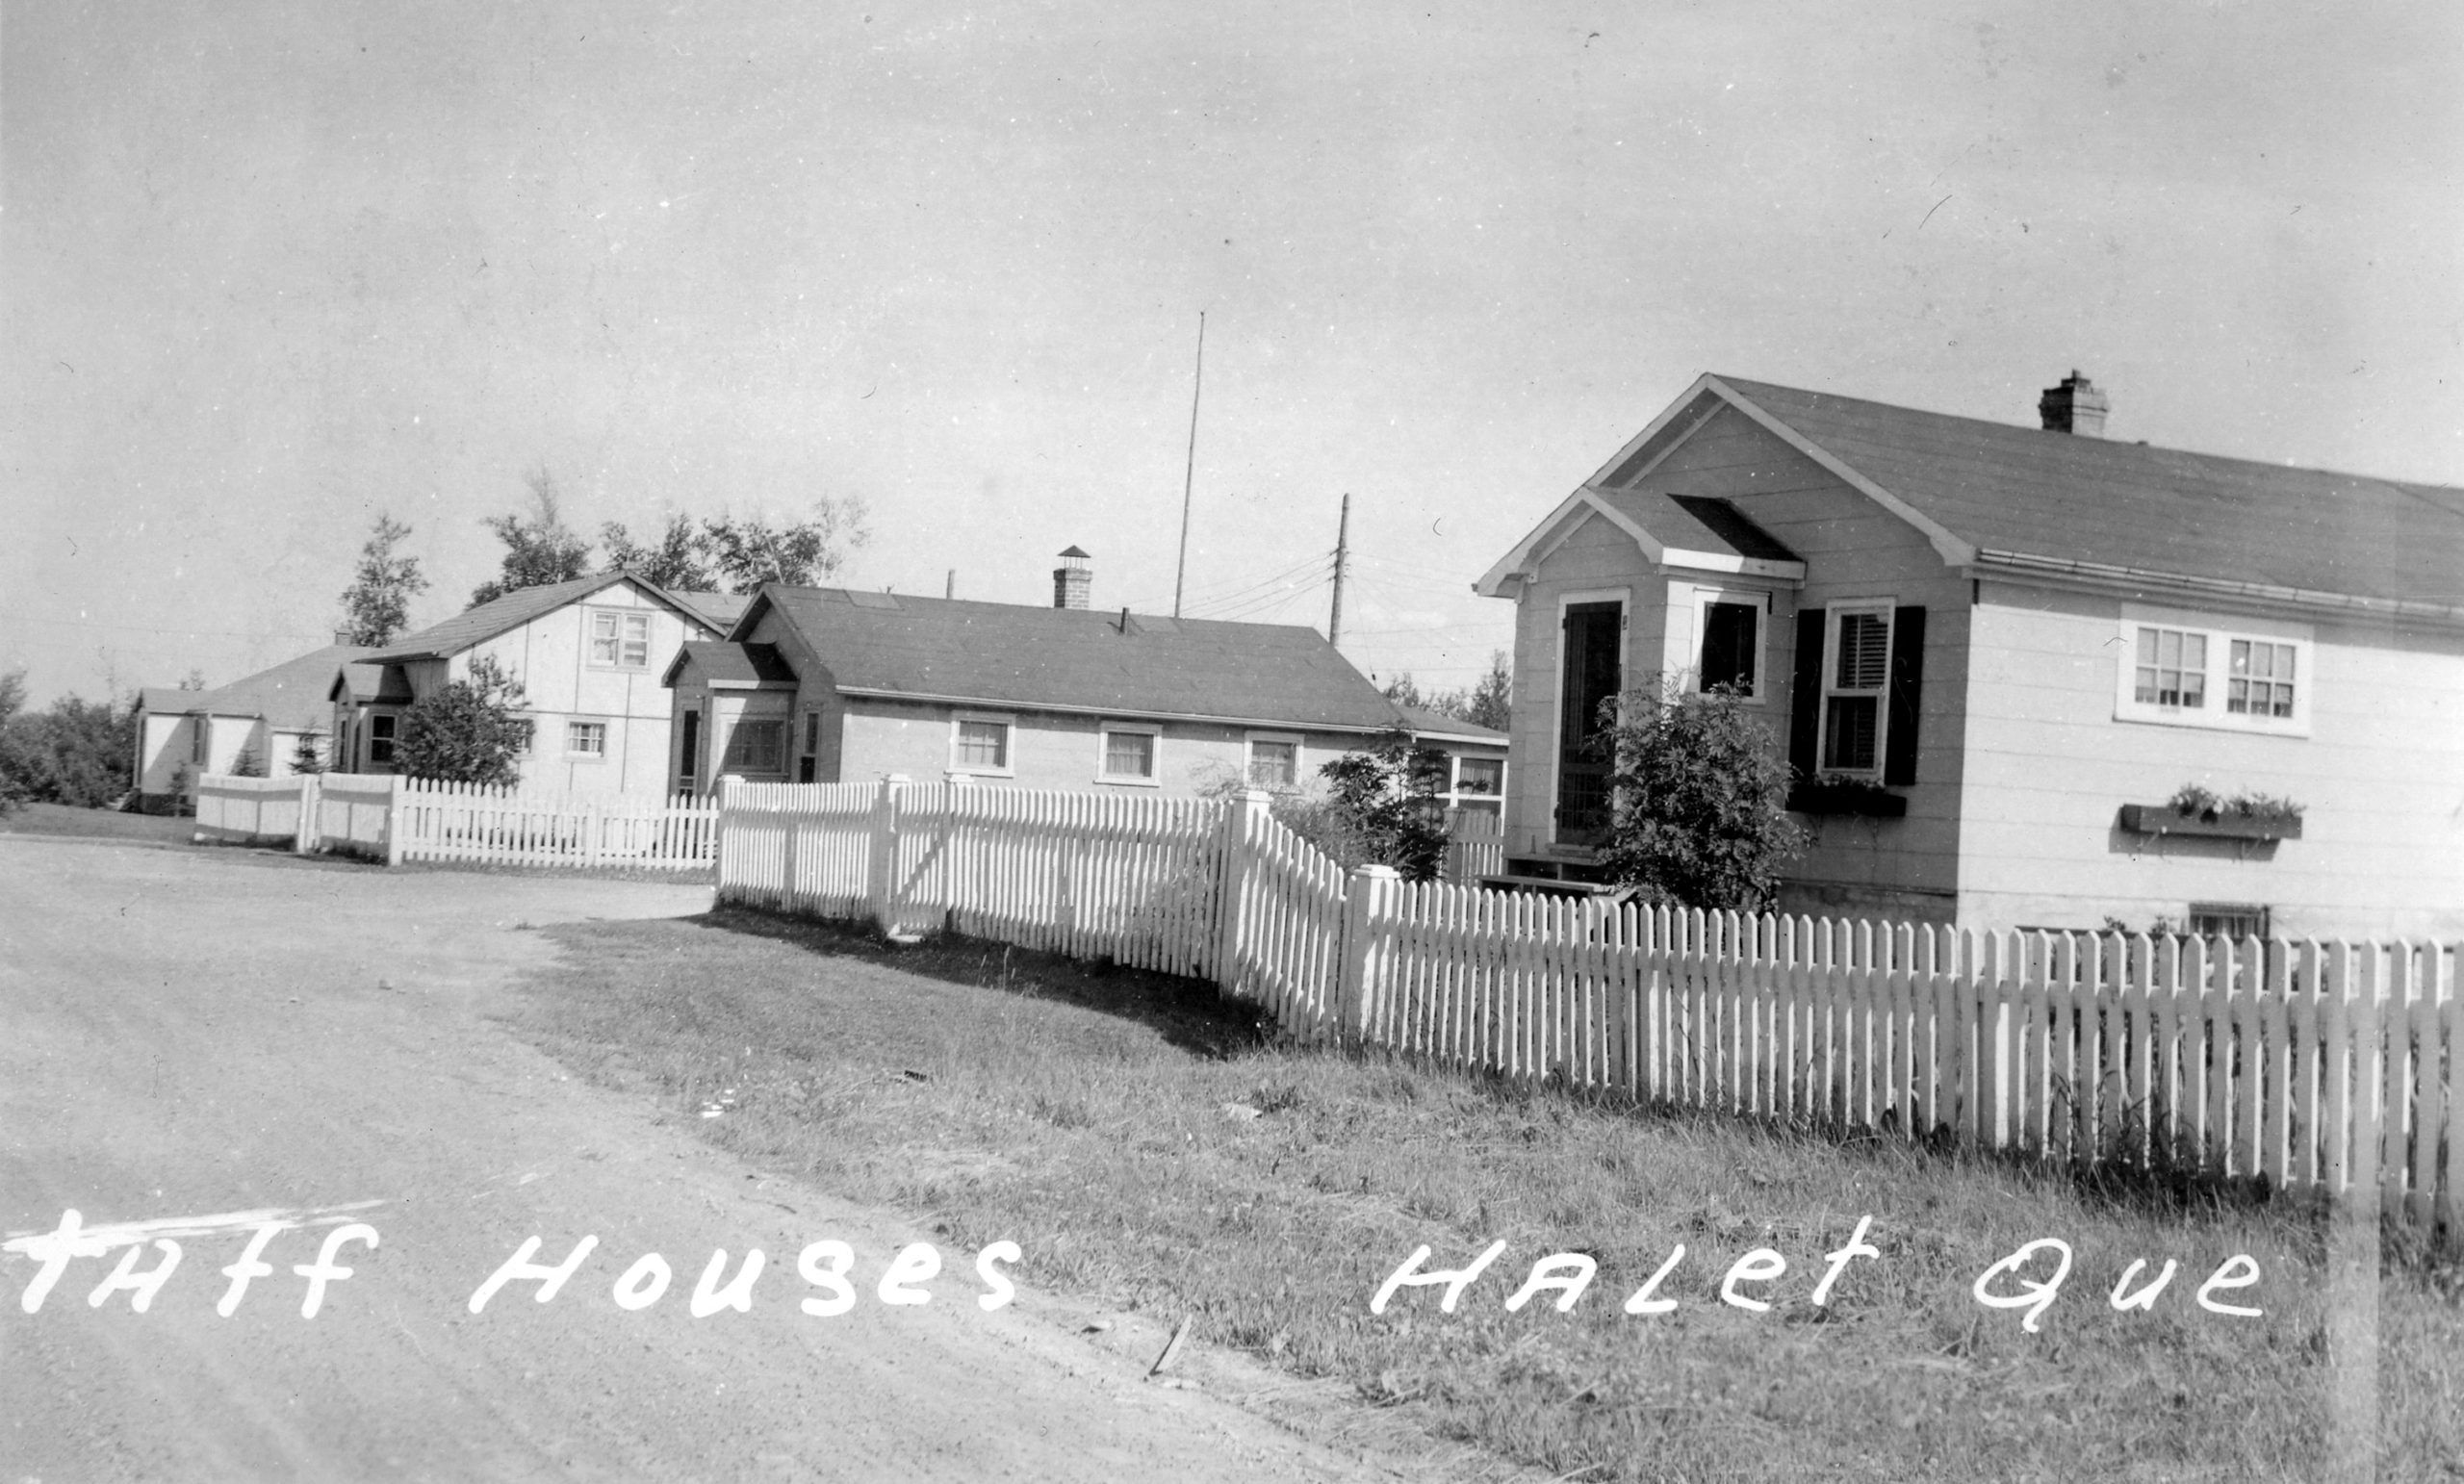 Black and white photograph of several plank houses surrounded by a white fence. At the bottom is the inscription "Staff Houses, Halet Que".